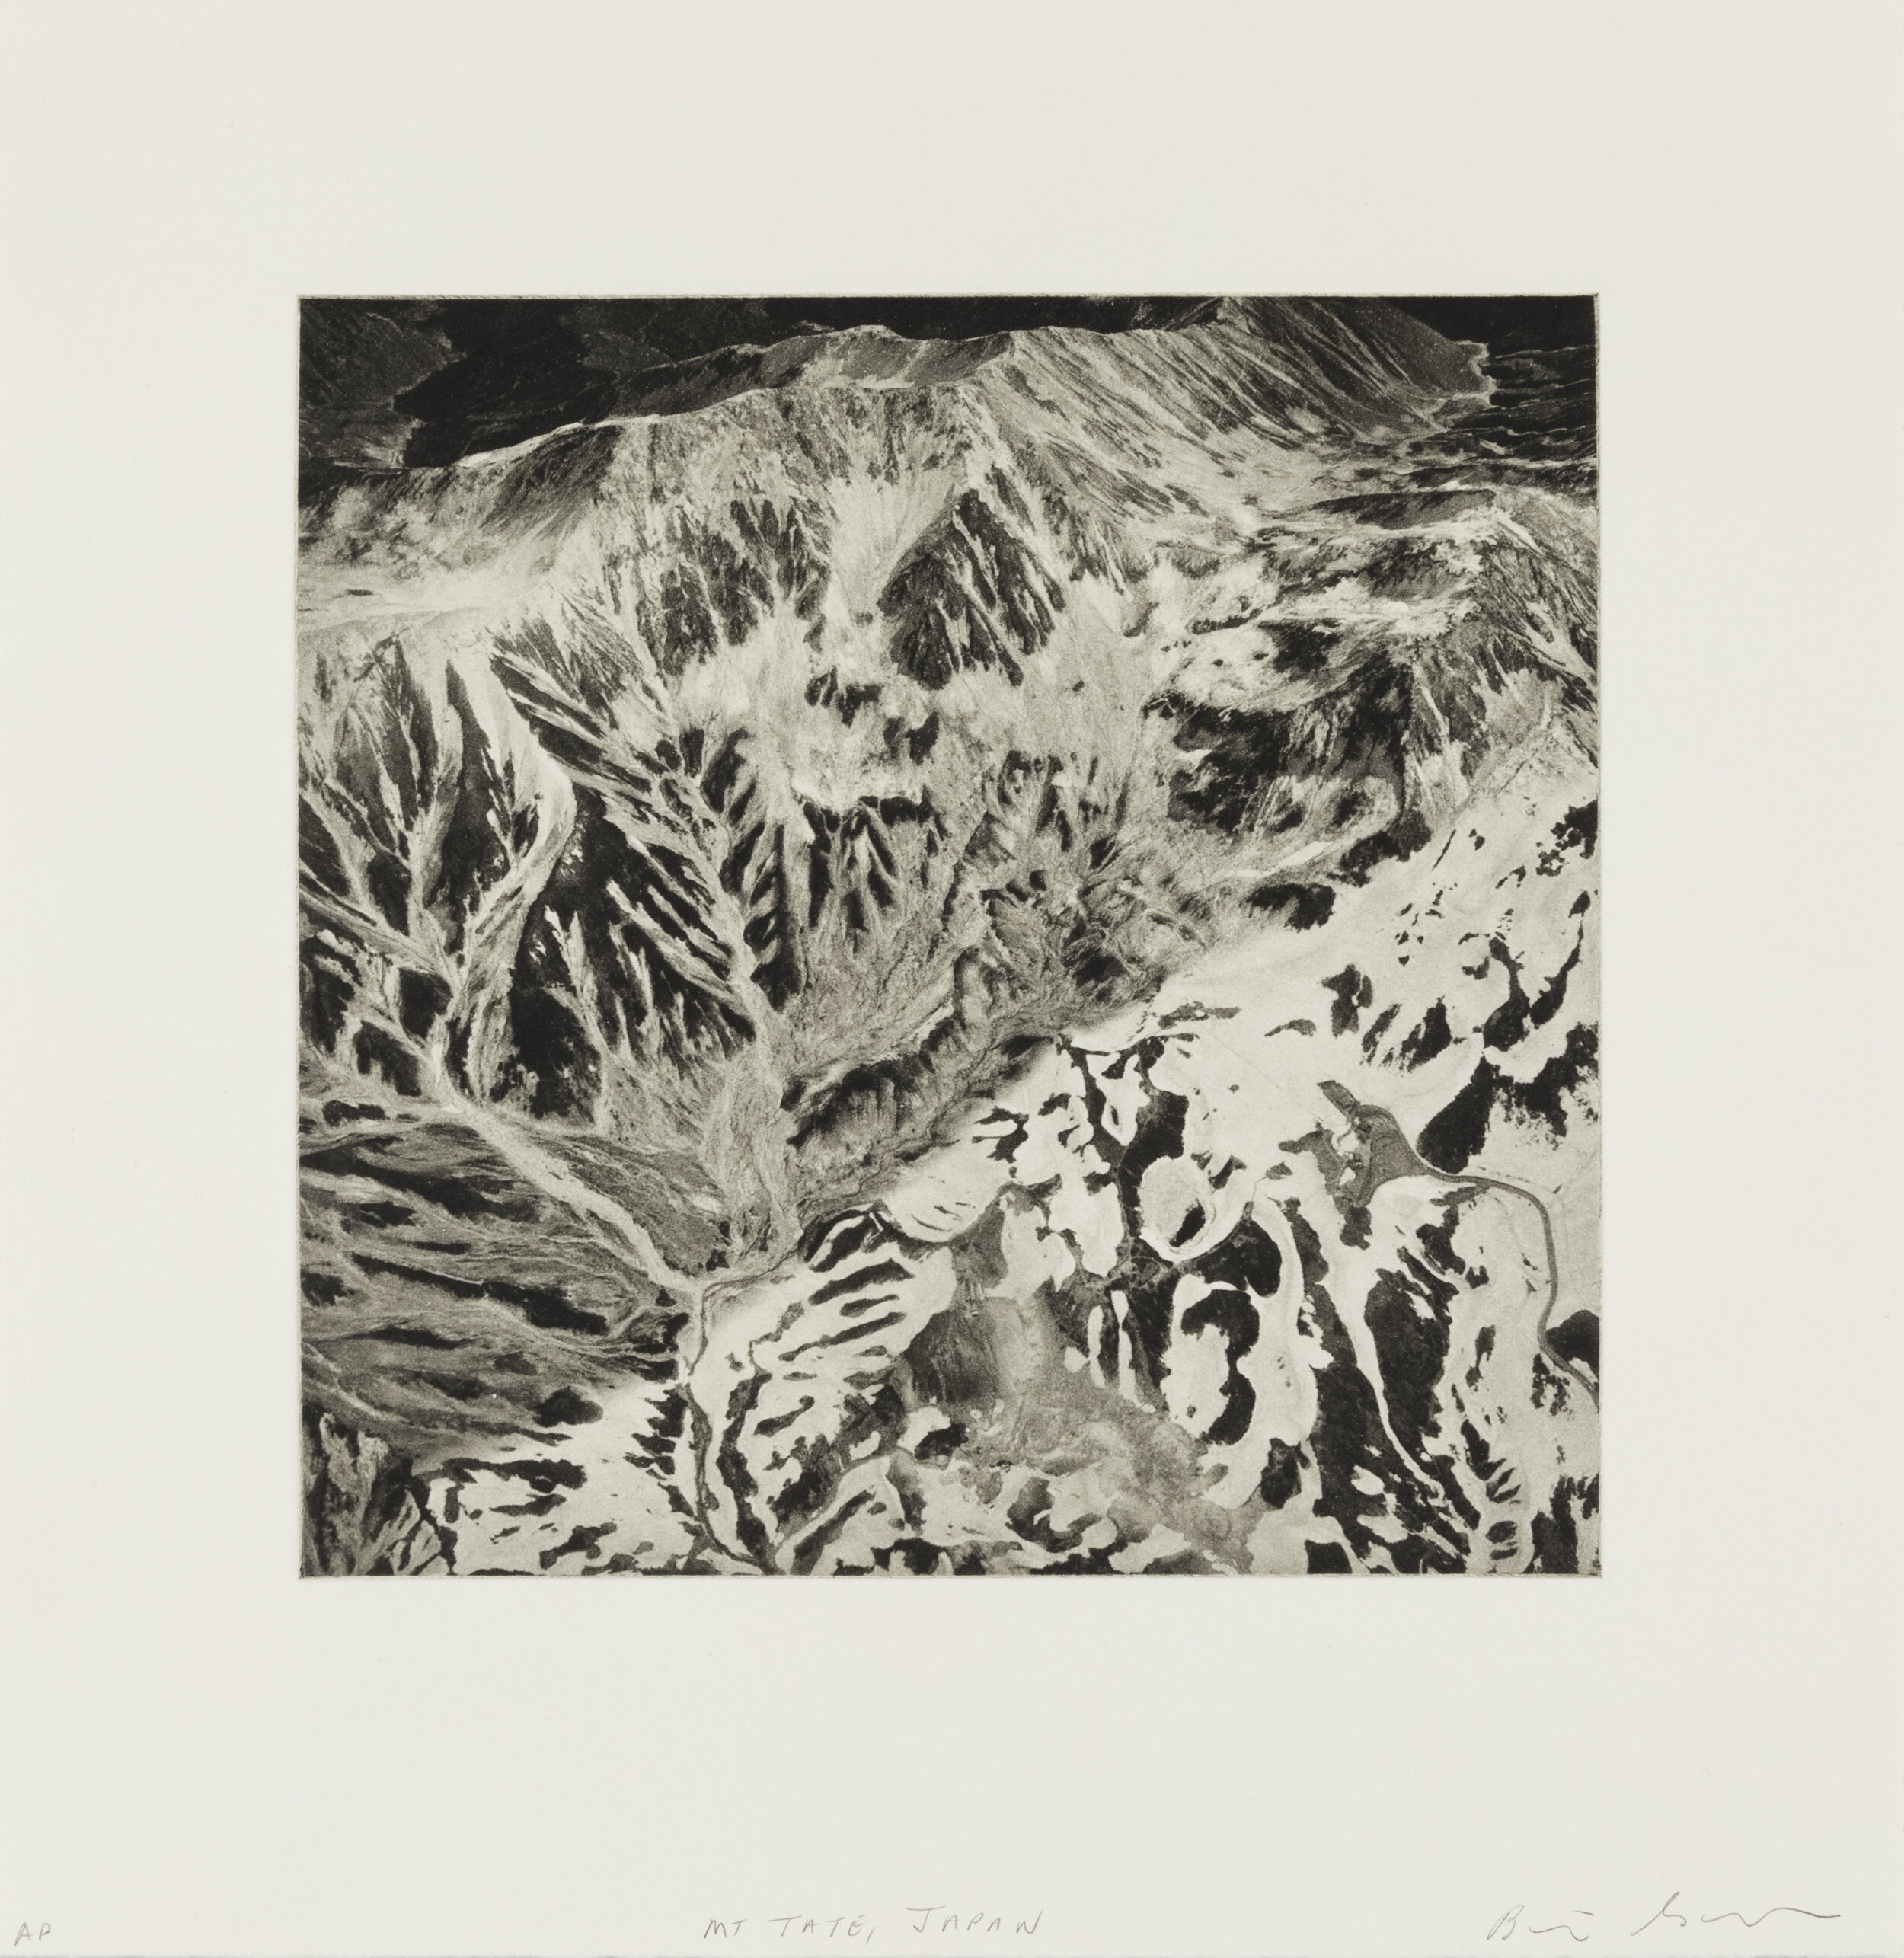    Mount Tate, Japan, 2019    Copperplate photogravure etching on cotton rag paper, plate size; 10.6” x 10.6”, paper size; 16” x 15.5”, edition 10  